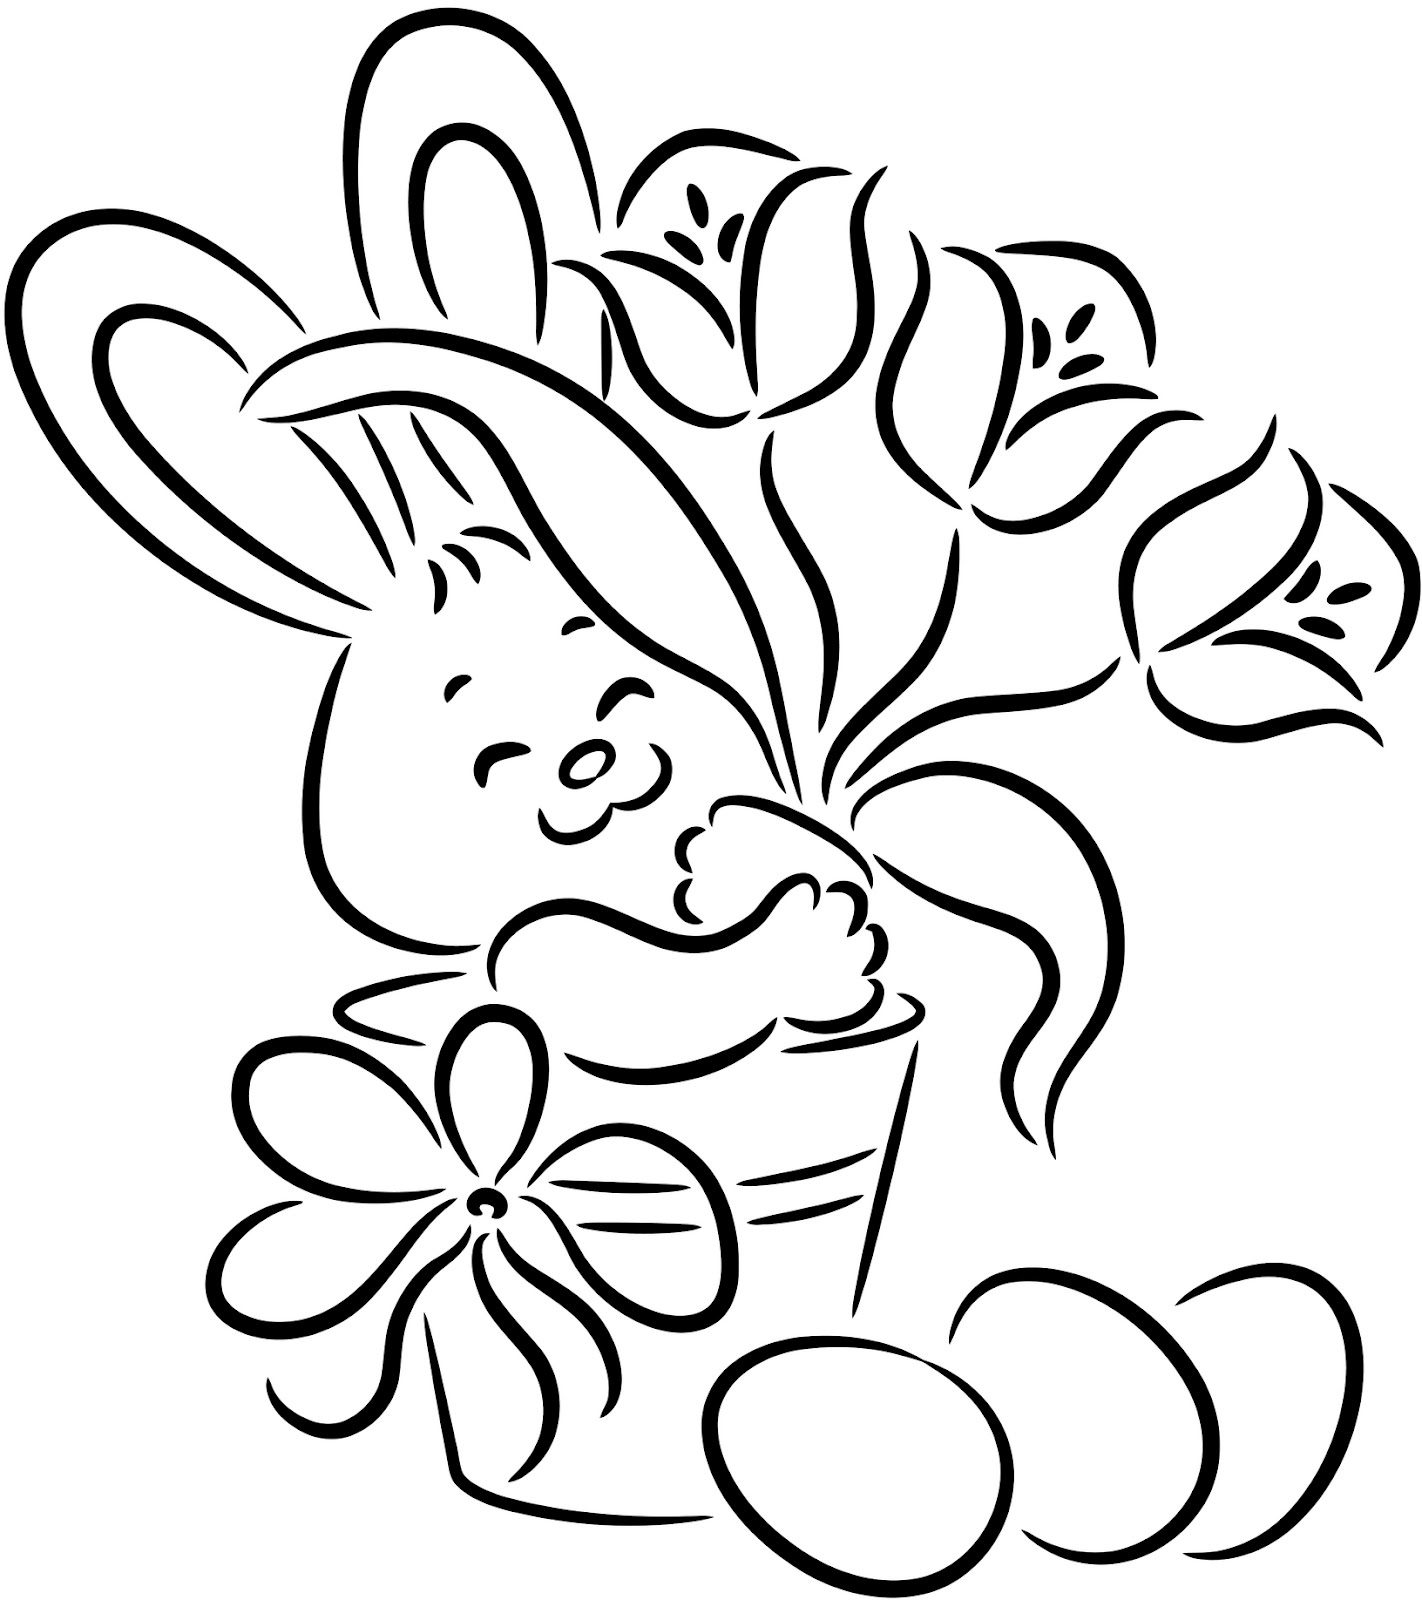 Download 16 Easter Bunny Coloring Pages >> Disney Coloring Pages